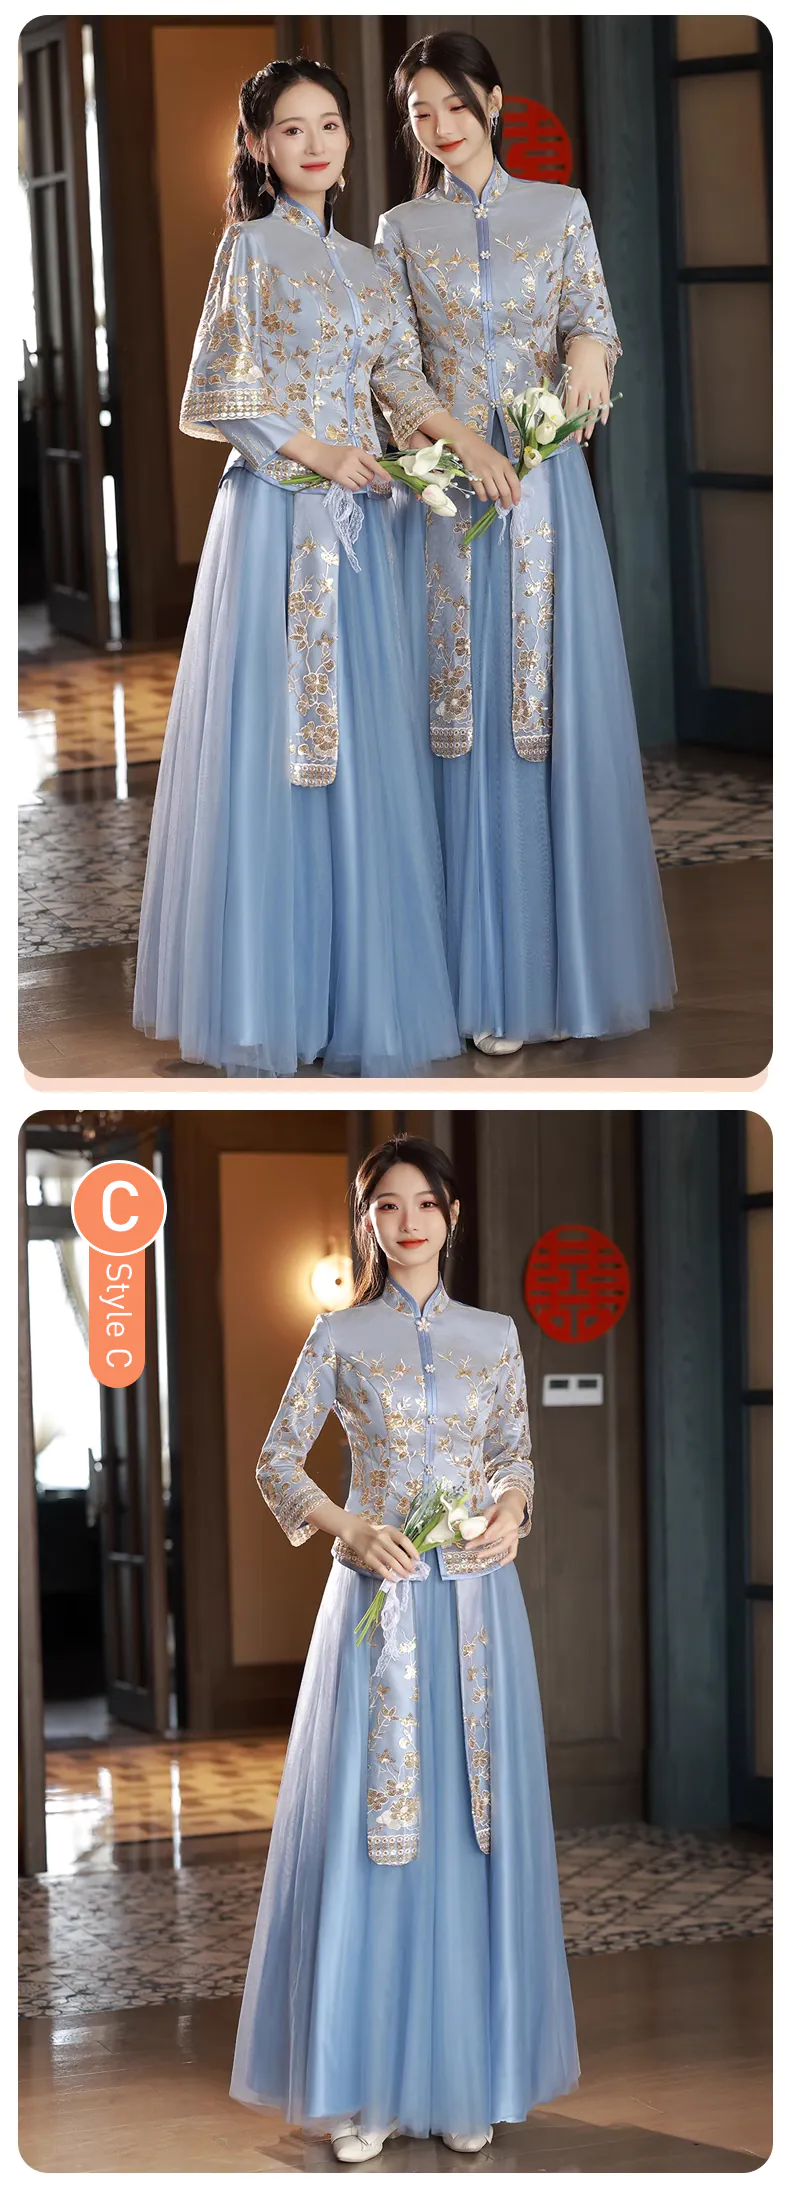 Chinese-Traditional-Style-Blue-Bridal-Wedding-Party-Bridesmaid-Dress18